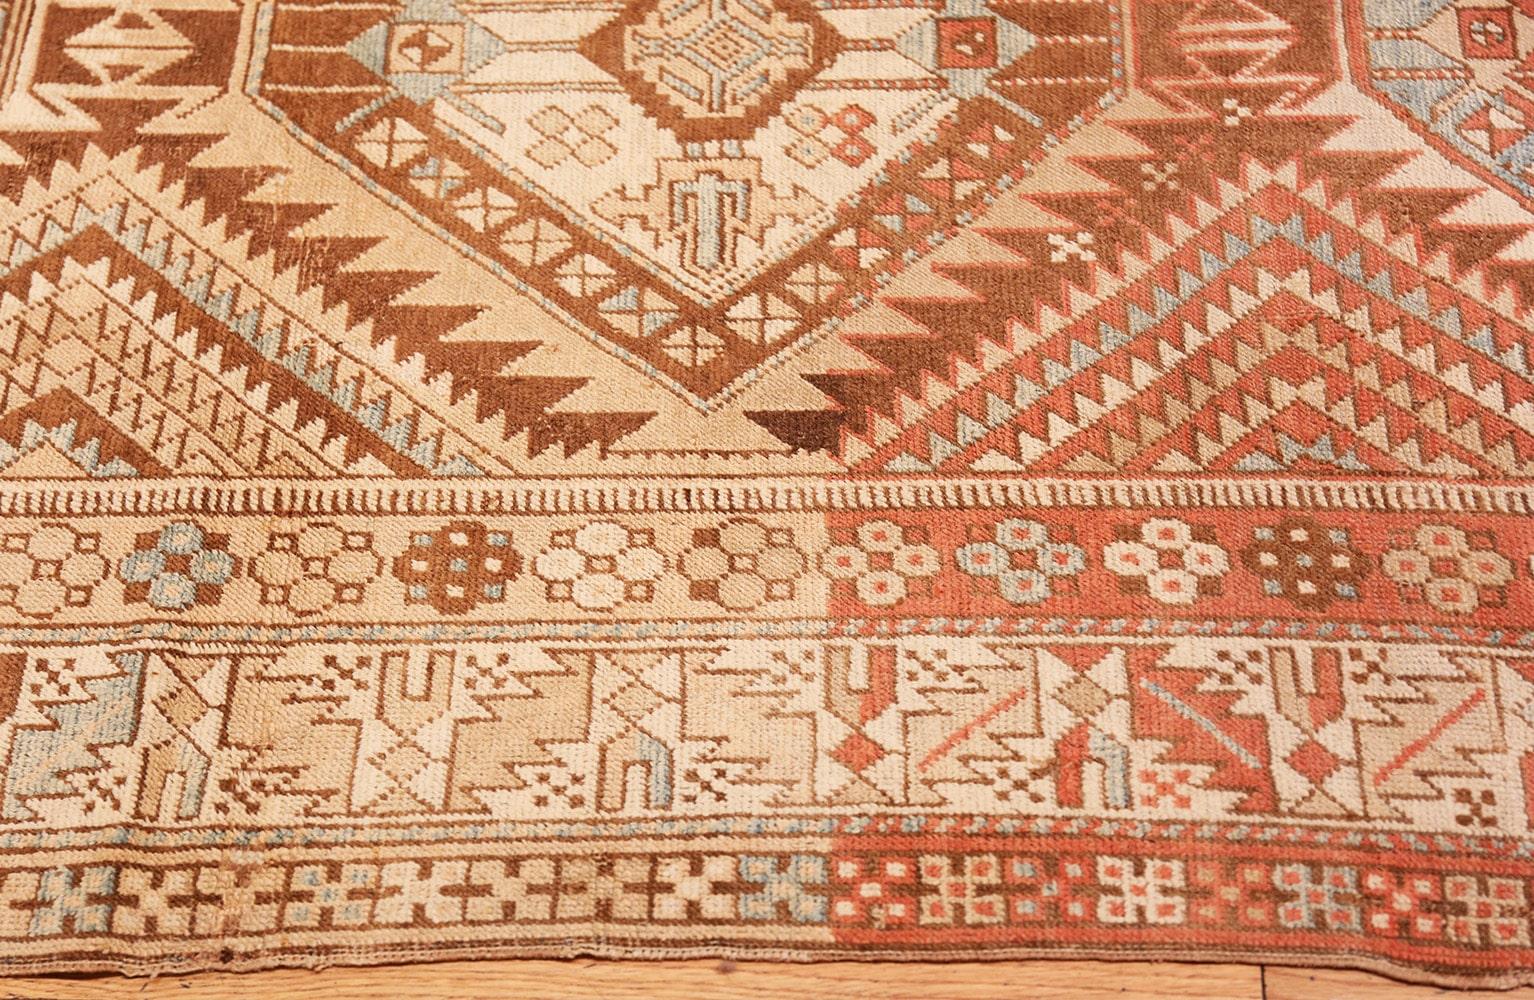 Vintage Caucasian Shirvan Rug, Country of Origin: Caucasus, Circa Date: Early 20th Century. Size: 3 ft 10 in x 7 ft 4 in (1.17 m x 2.24 m)

